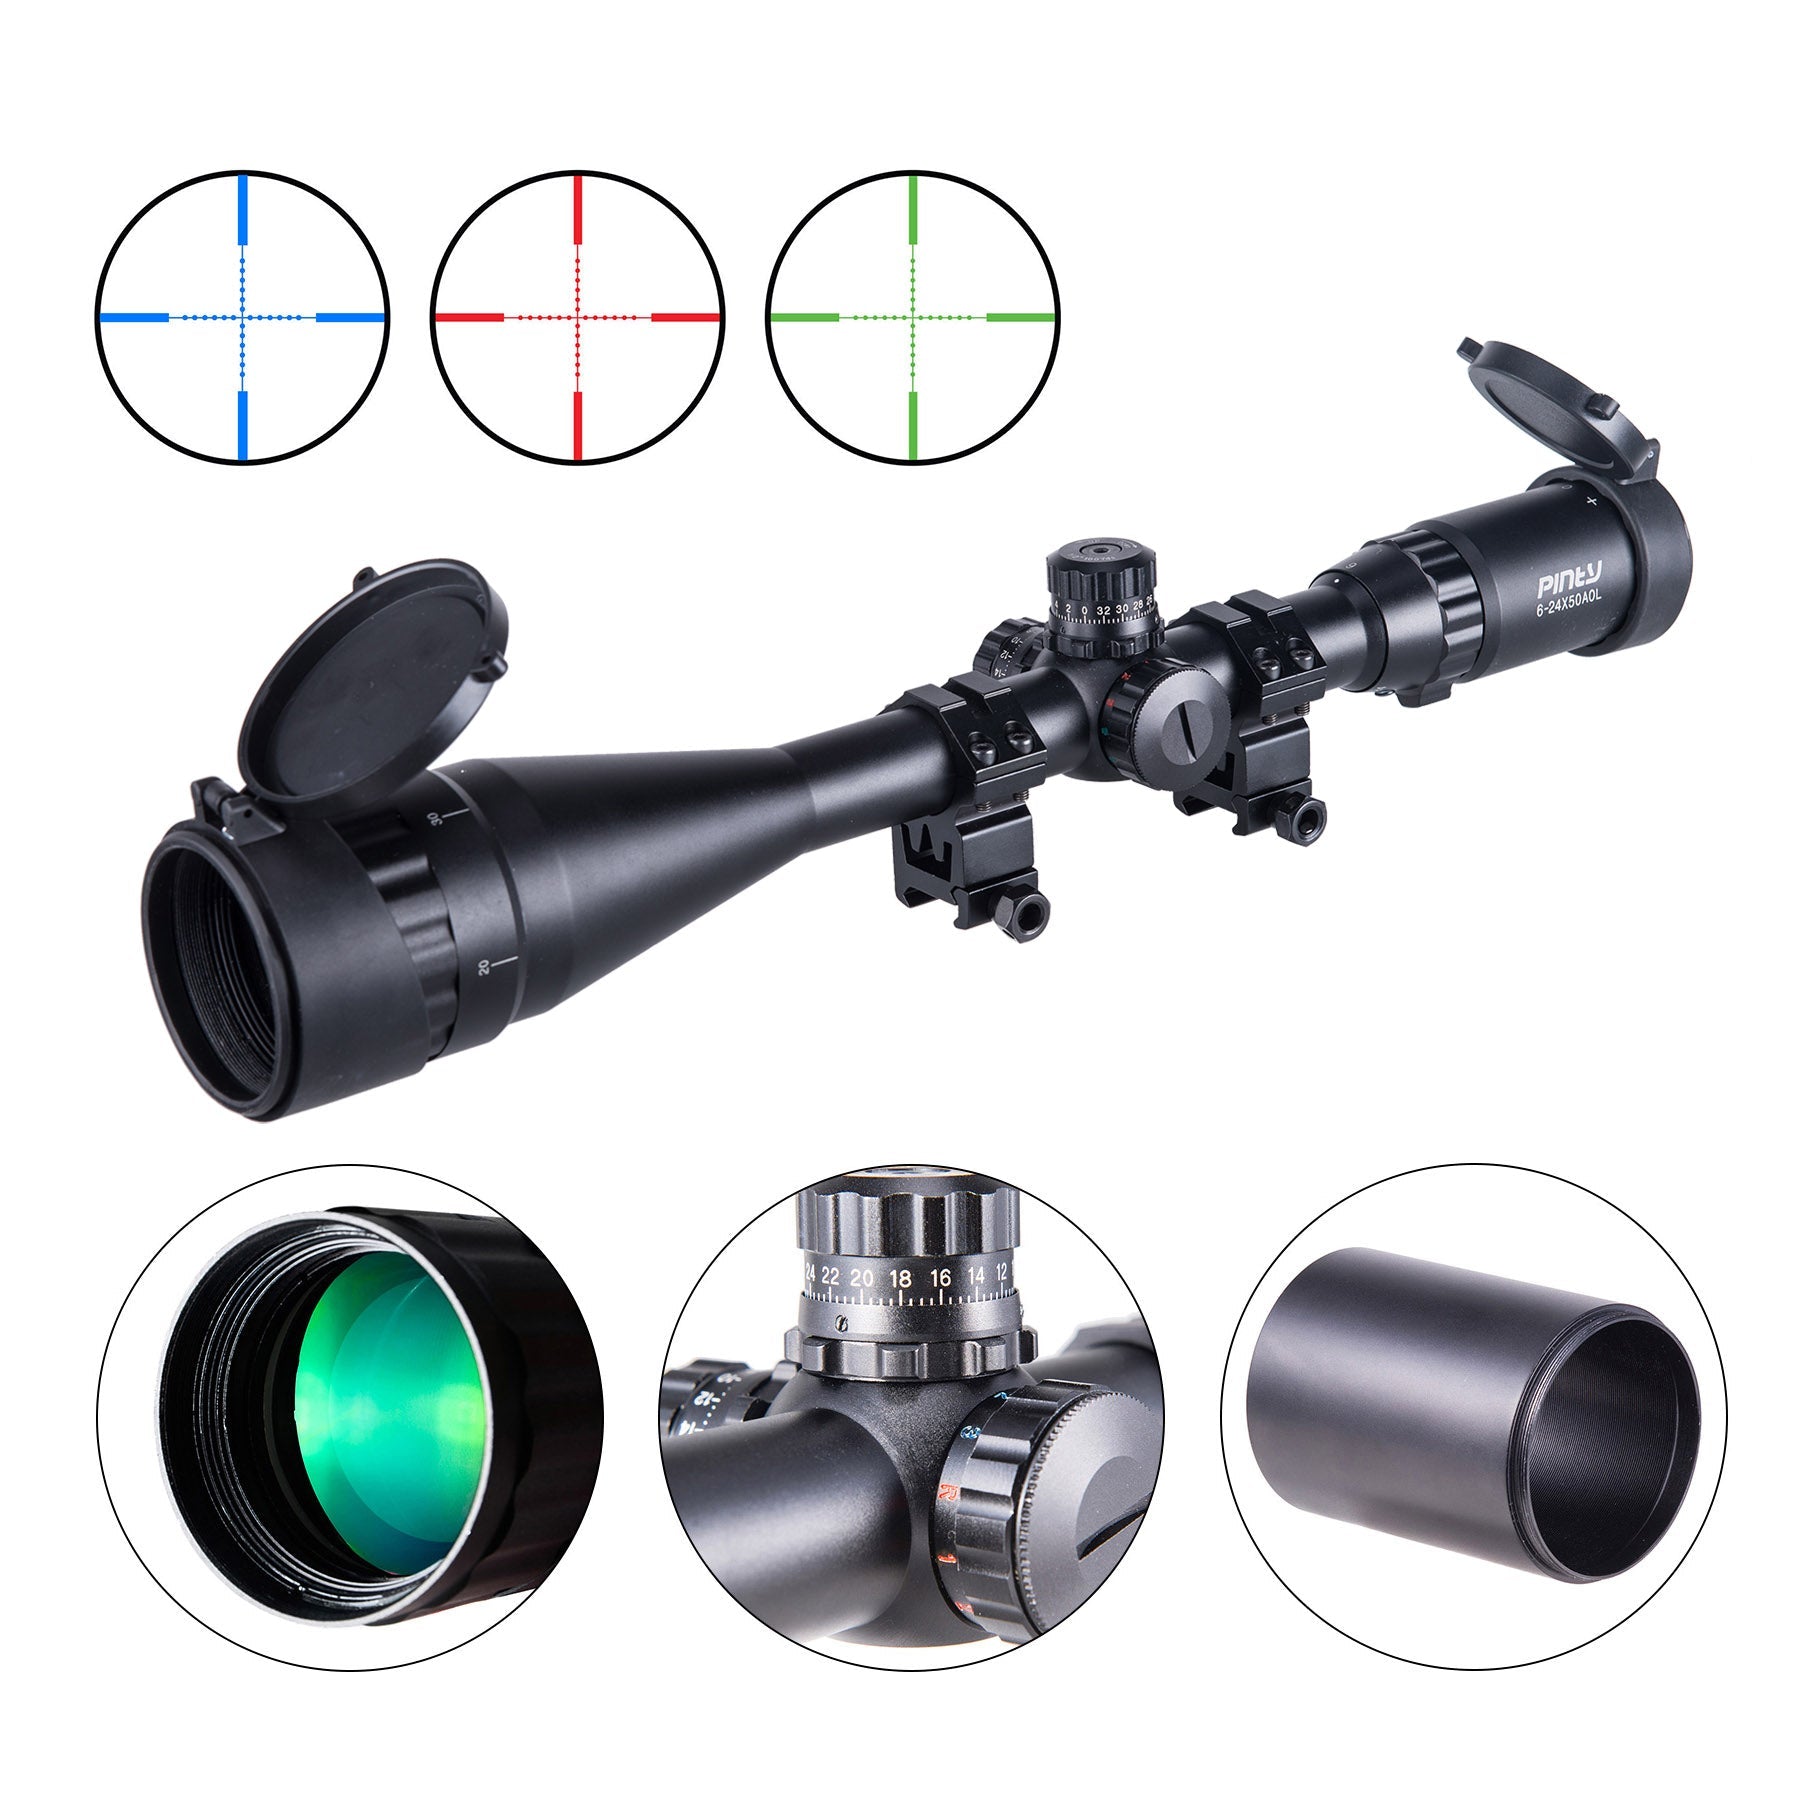 【BUY 1 GET 1 FREE Gift】6-24x50 AO illuminated mil dot riflescope with sunshade tube, flip-up cap and ring mount high-profile picatinny rings